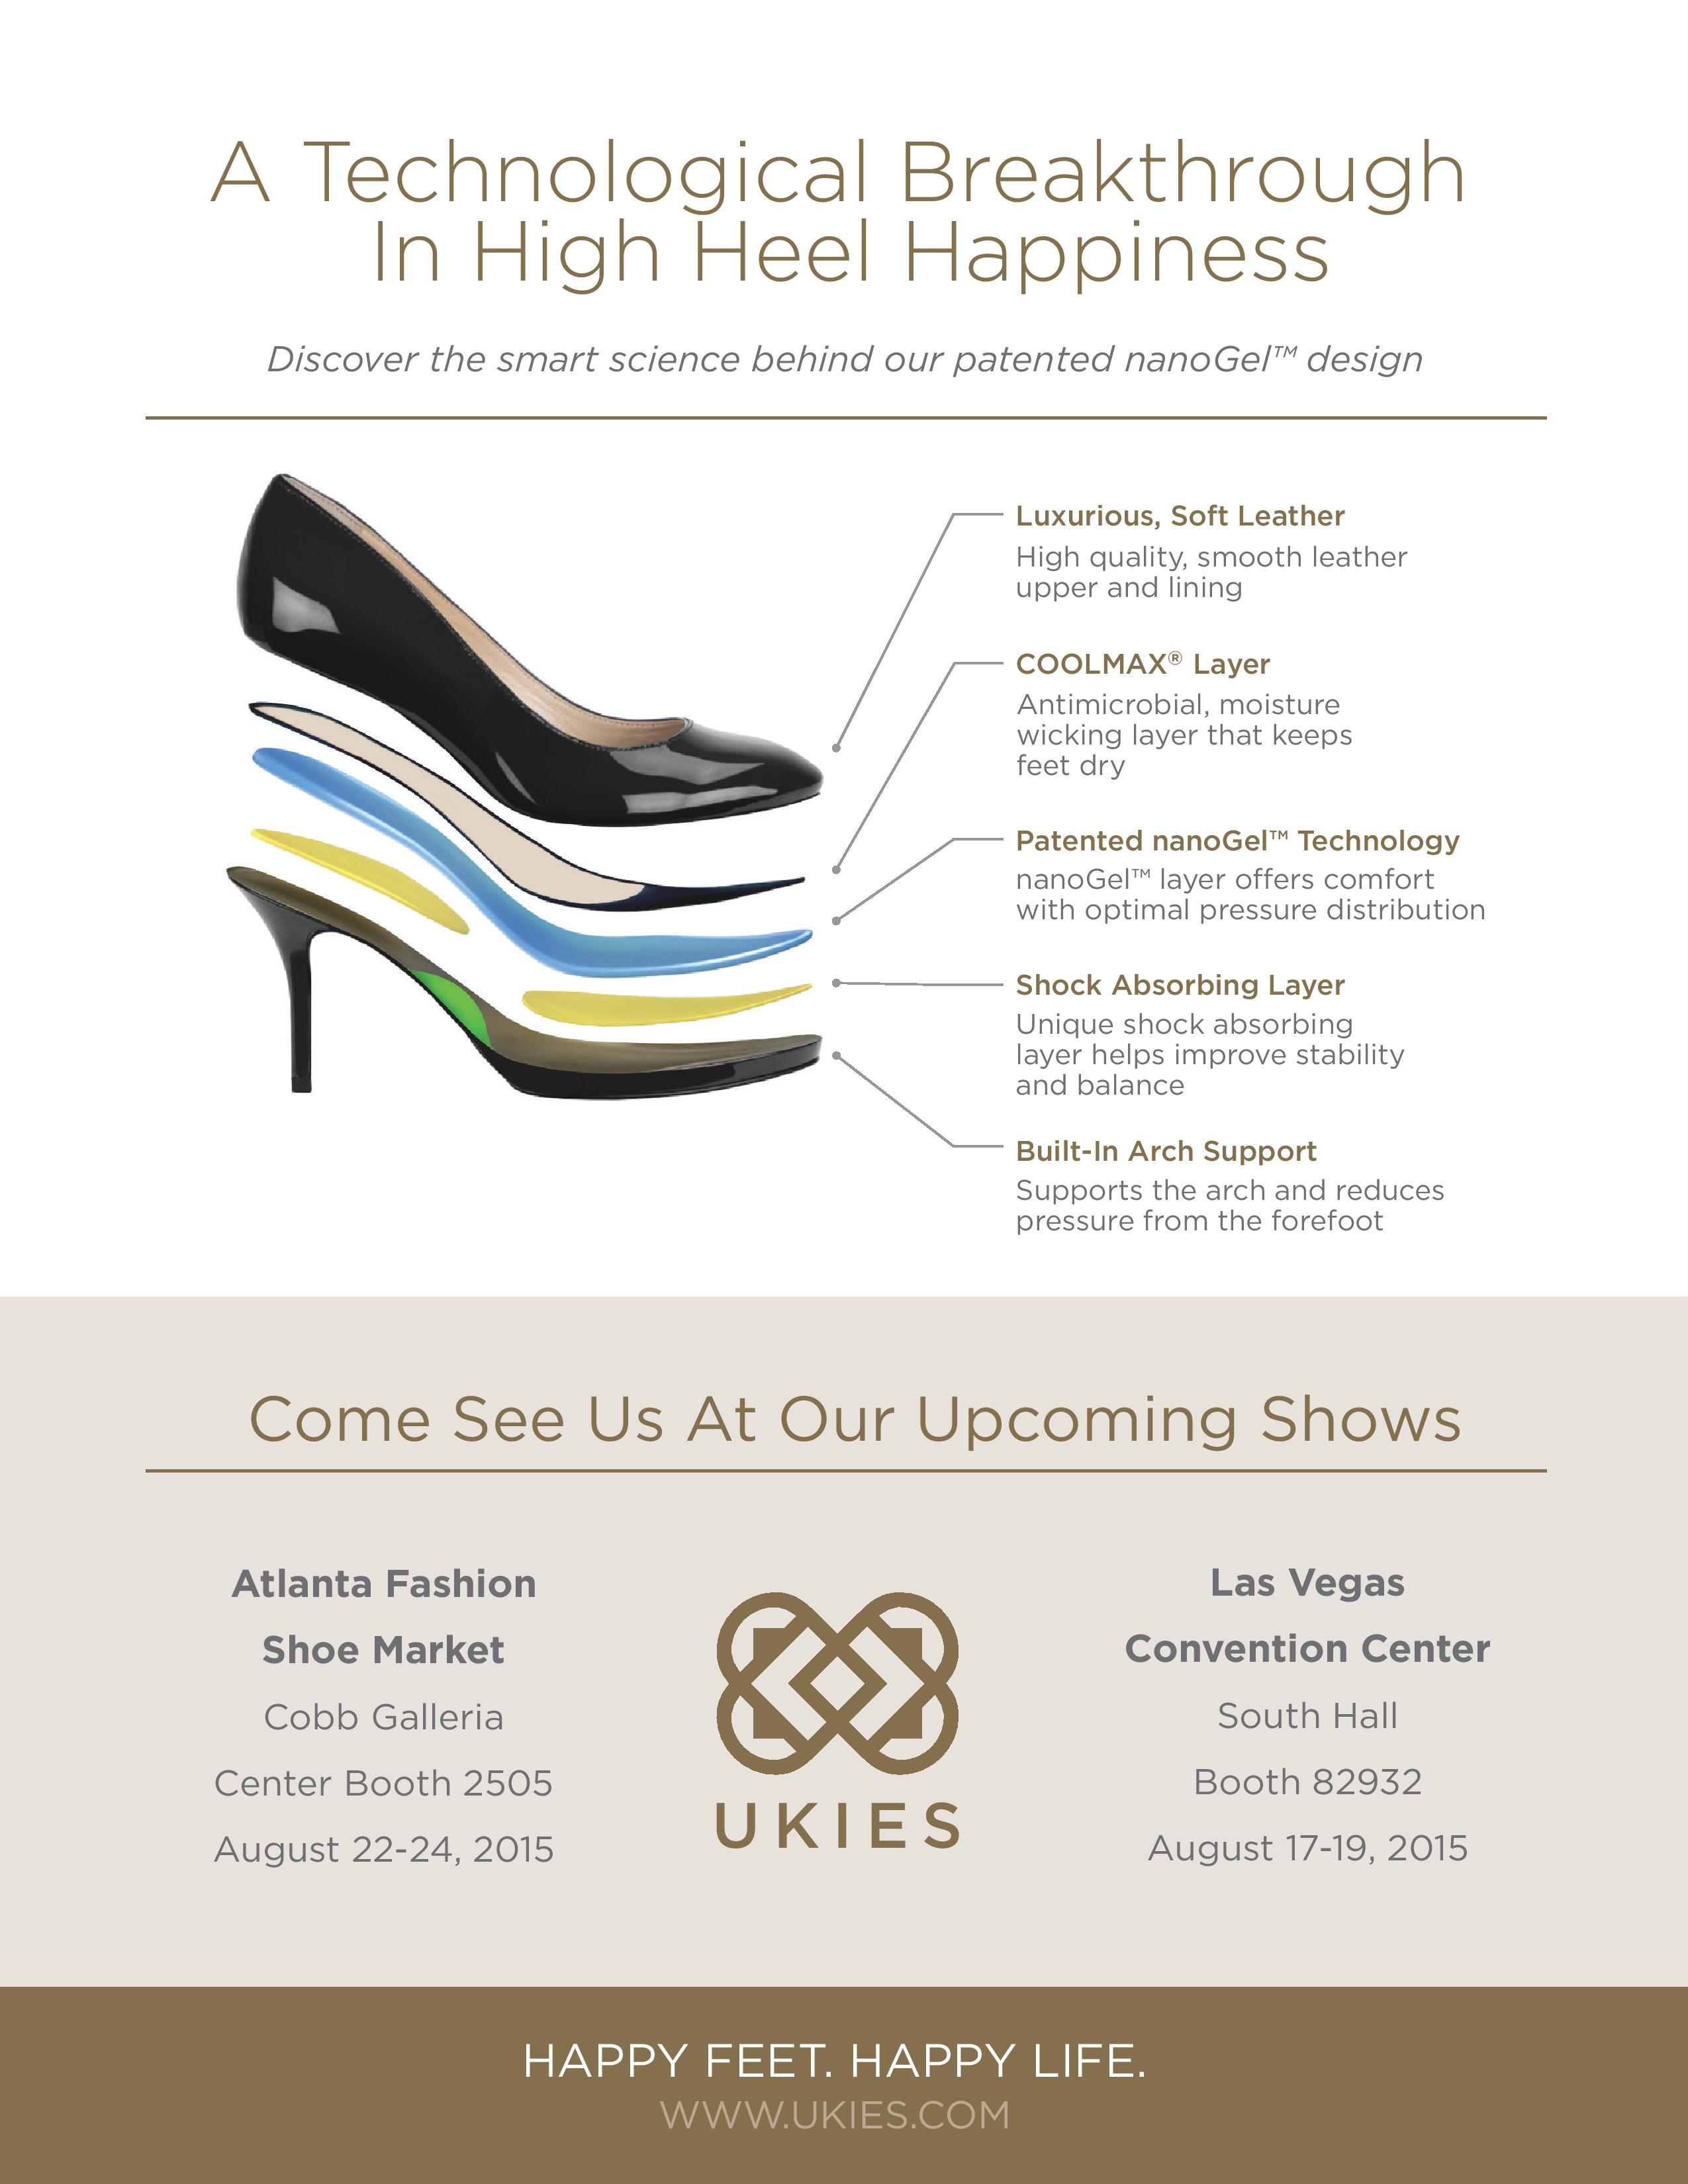 UKIES Trade Show Dates August 2015